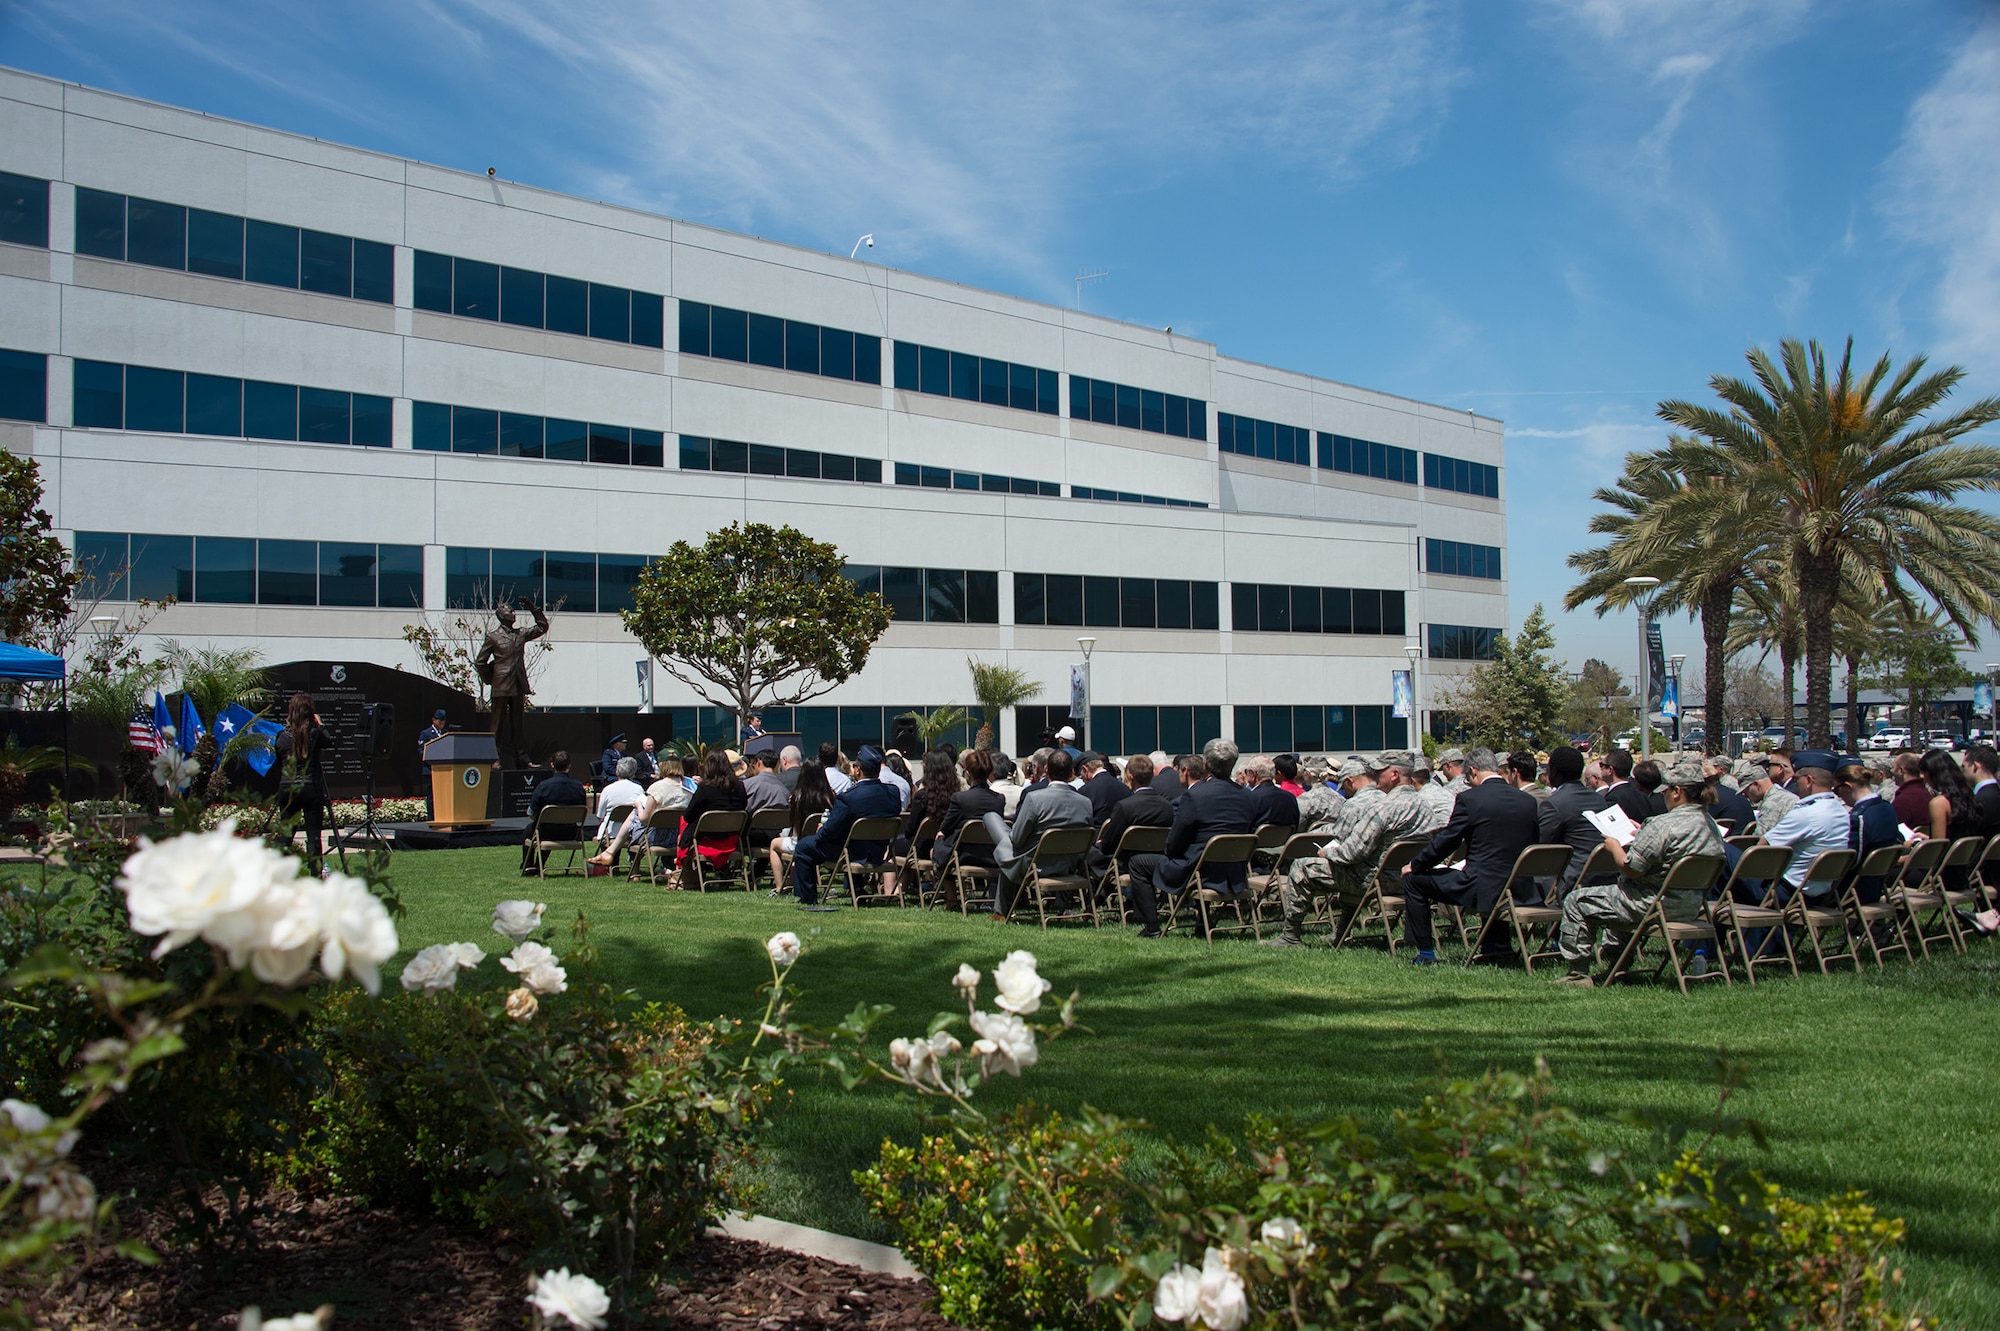 More than 200 attendees, including family members and civic leaders from the surrounding South Bay beach cities honored six new Air Force and civilian space pioneers, whose names are newly inscribed on a wall of polished black granite at the General Bernard A. Schriever Memorial, located on the grounds of the Space and Missile Systems Center at Los Angeles Air Force Base in El Segundo, California, May 14, 2018. (U.S. Air Force photo/Van De Ha)